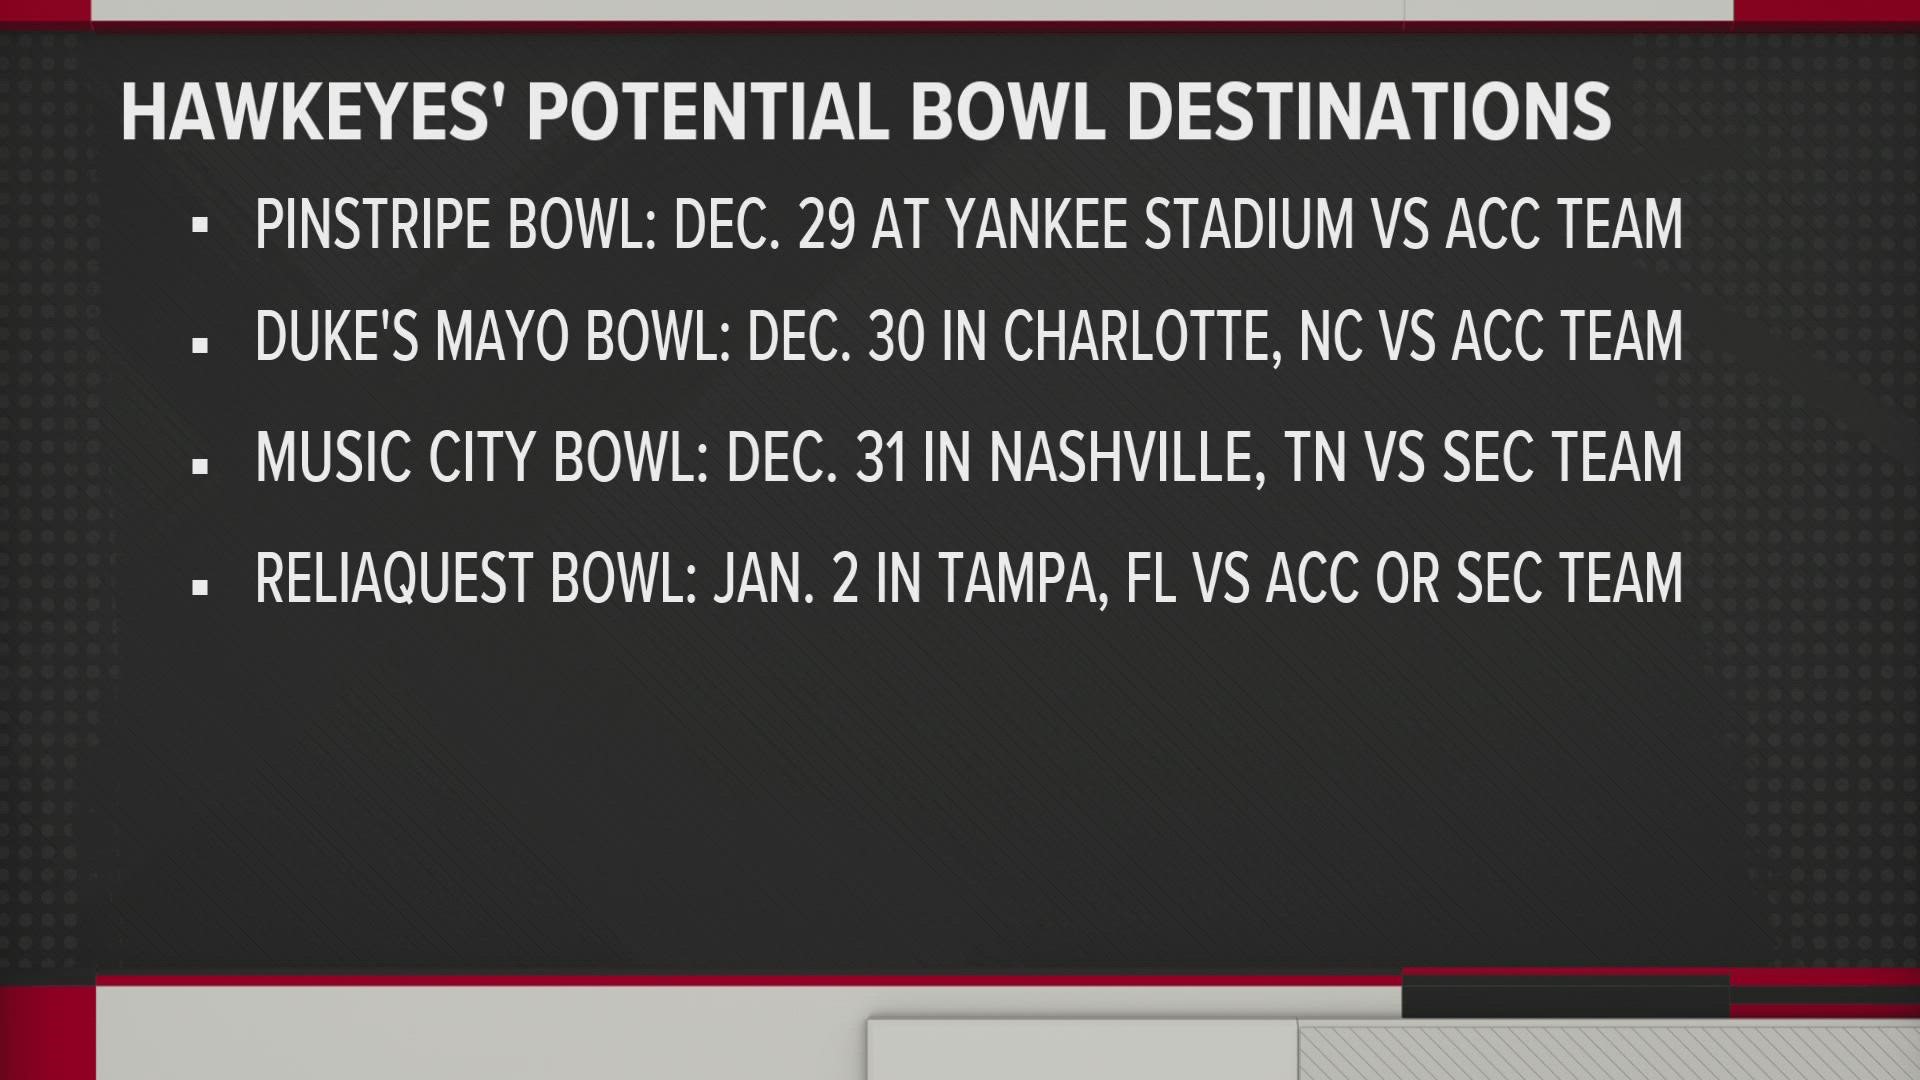 Currently, ESPN, CBS and 247Sports all have Iowa in different bowl games. Iowa's destination will be announced next Sunday.